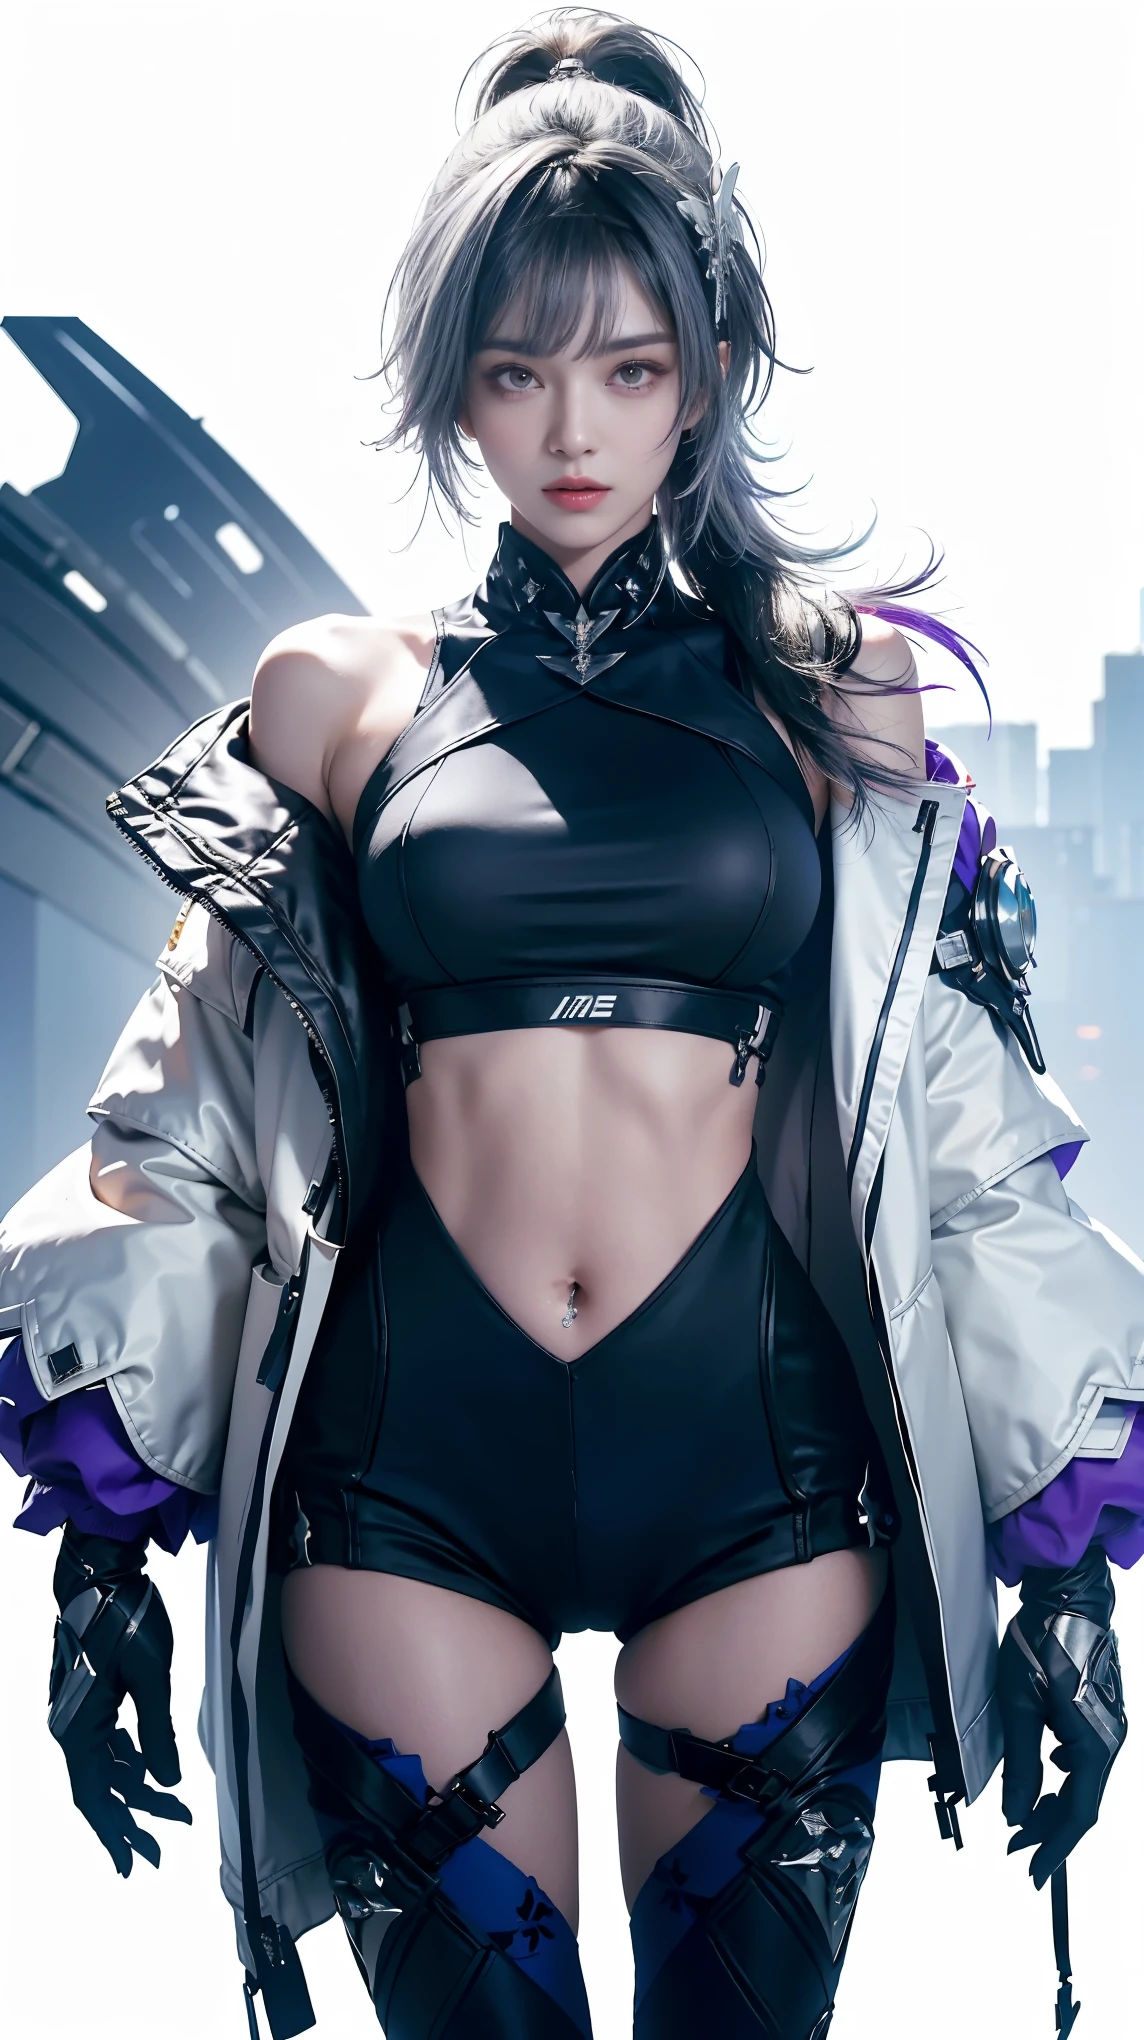 masterpiece,best quality,high resolution,8k，Focus on the thighs and above,RAW photos,digital photography,(Sci-fi style female family),20 year old girl,Long ponytail hairstyle,through bangs,(purple eyes),(white hair),A plump chest,felling,Elegant and noble,Serious and indifferent,Open white coat,Black camisole bra,rich details​,close your mouth,show your belly button,Intricate ornaments,cyberpunk futuristic style,(Female Scholar),photo poses,White background,oc render reflection texture